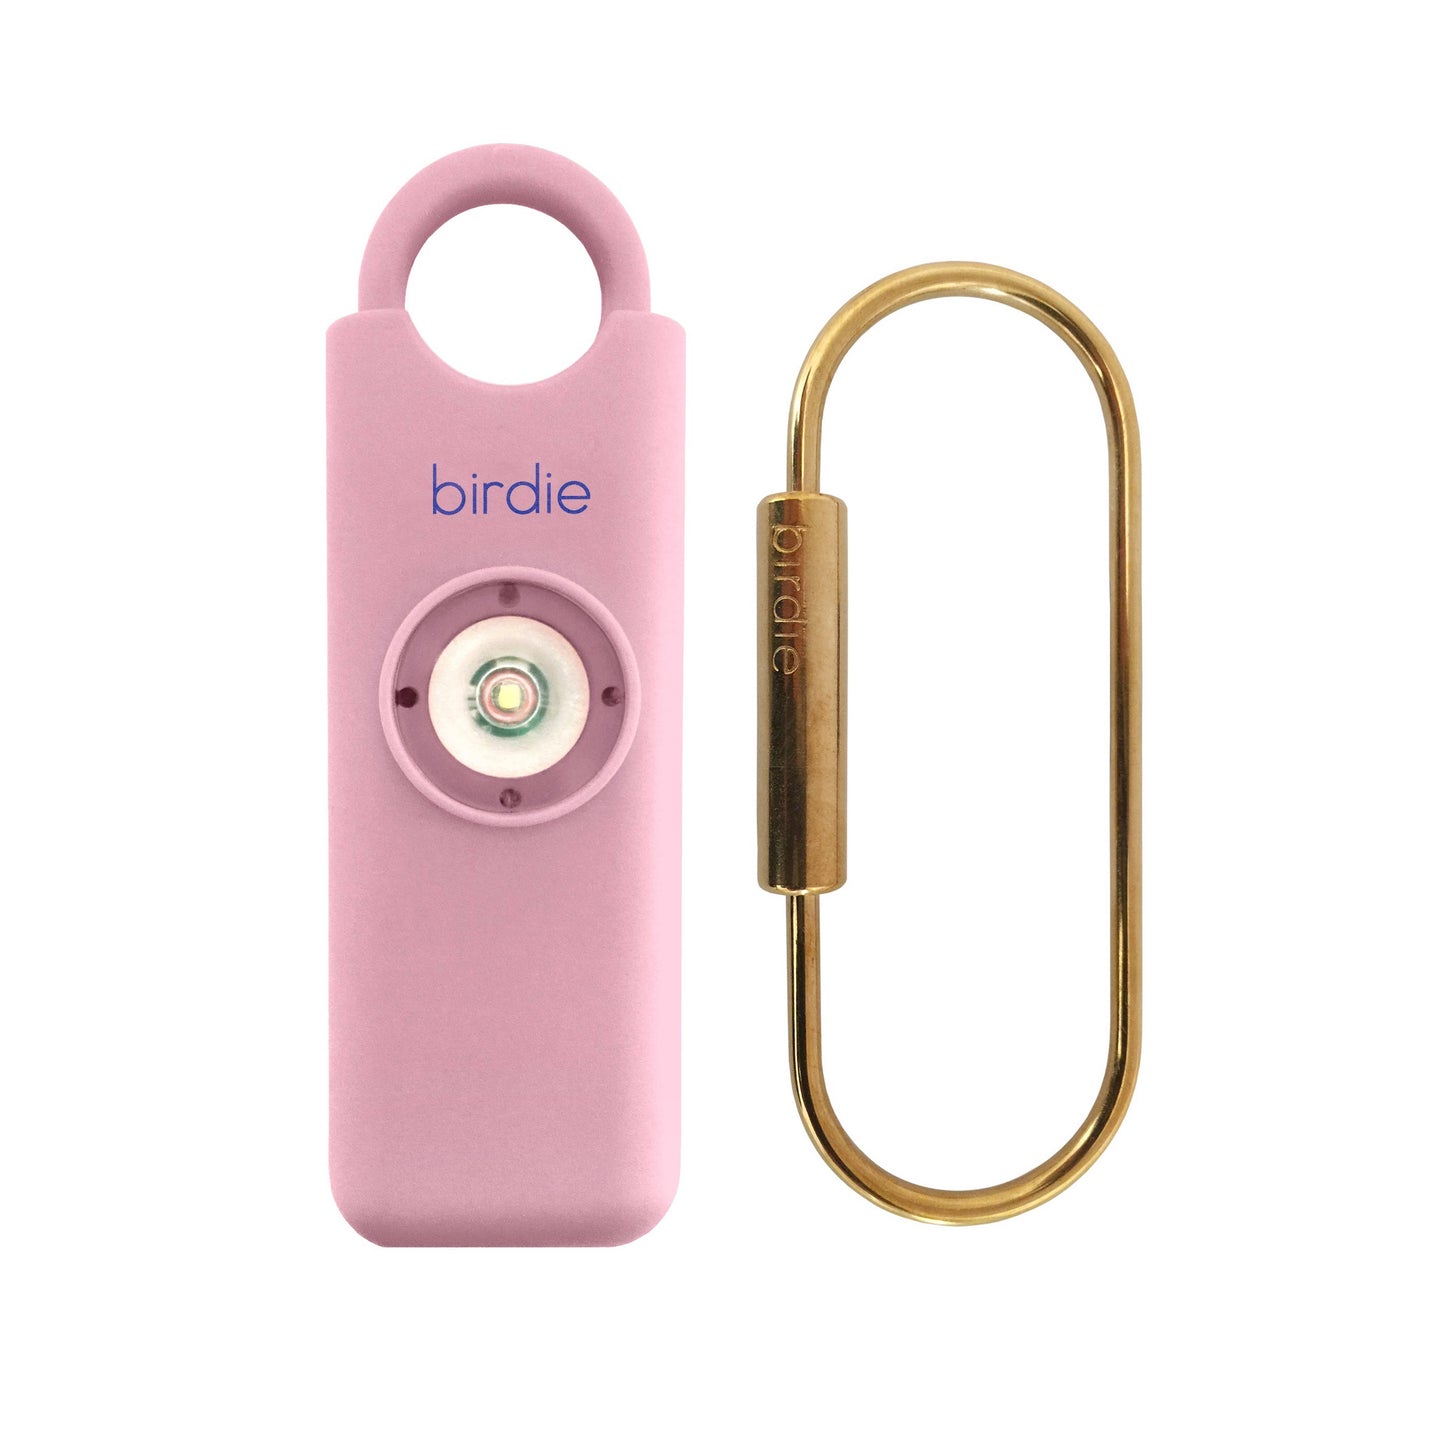 She's Birdie Personal Safety Alarm- Metallic Red